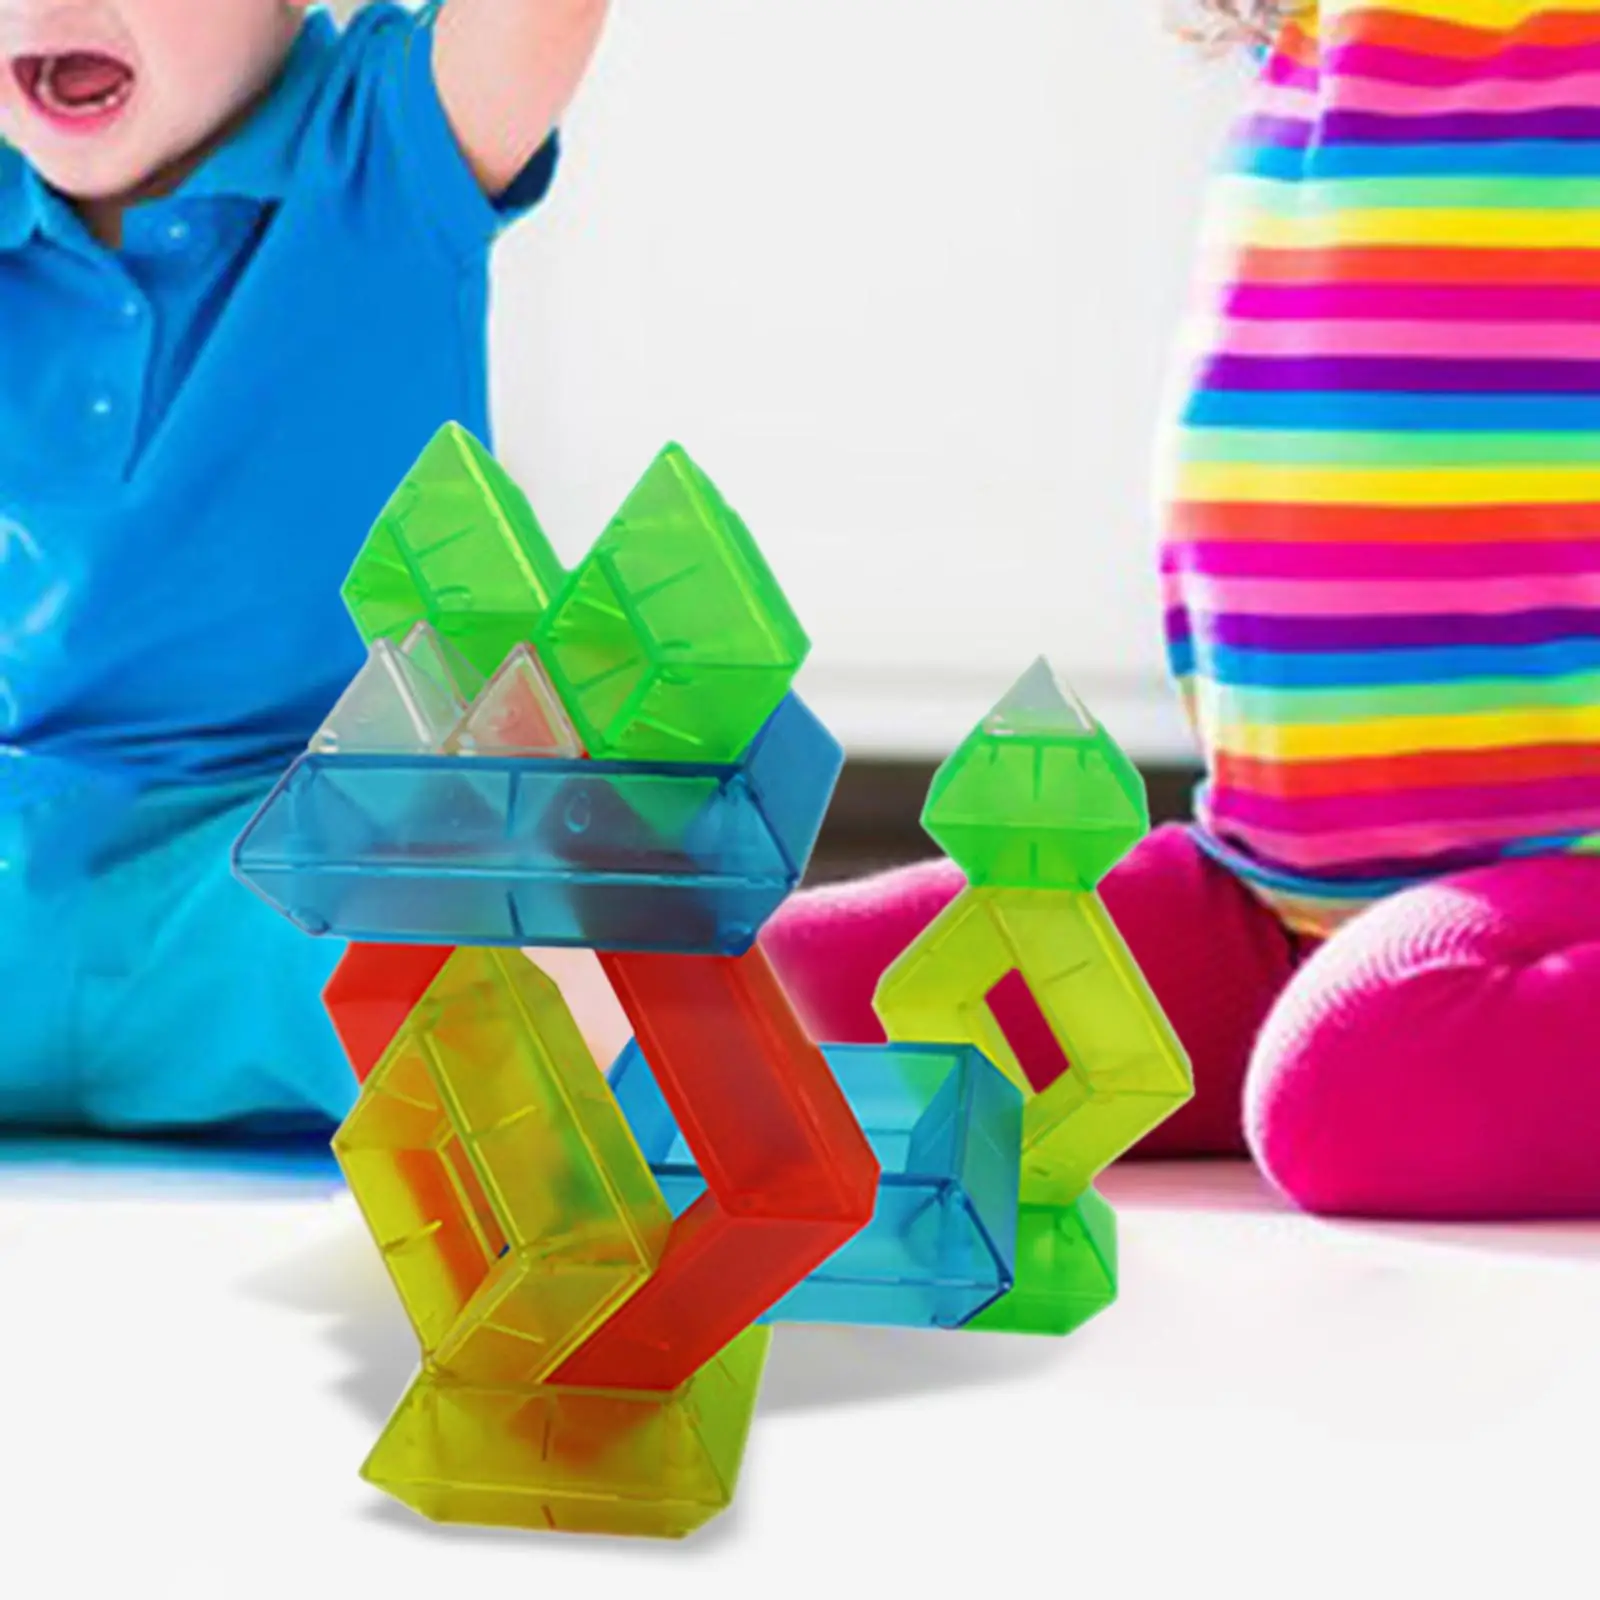 Educational Toys Stacking Building Colorful Blocks Balancing Puzzles Imagination for Toddler